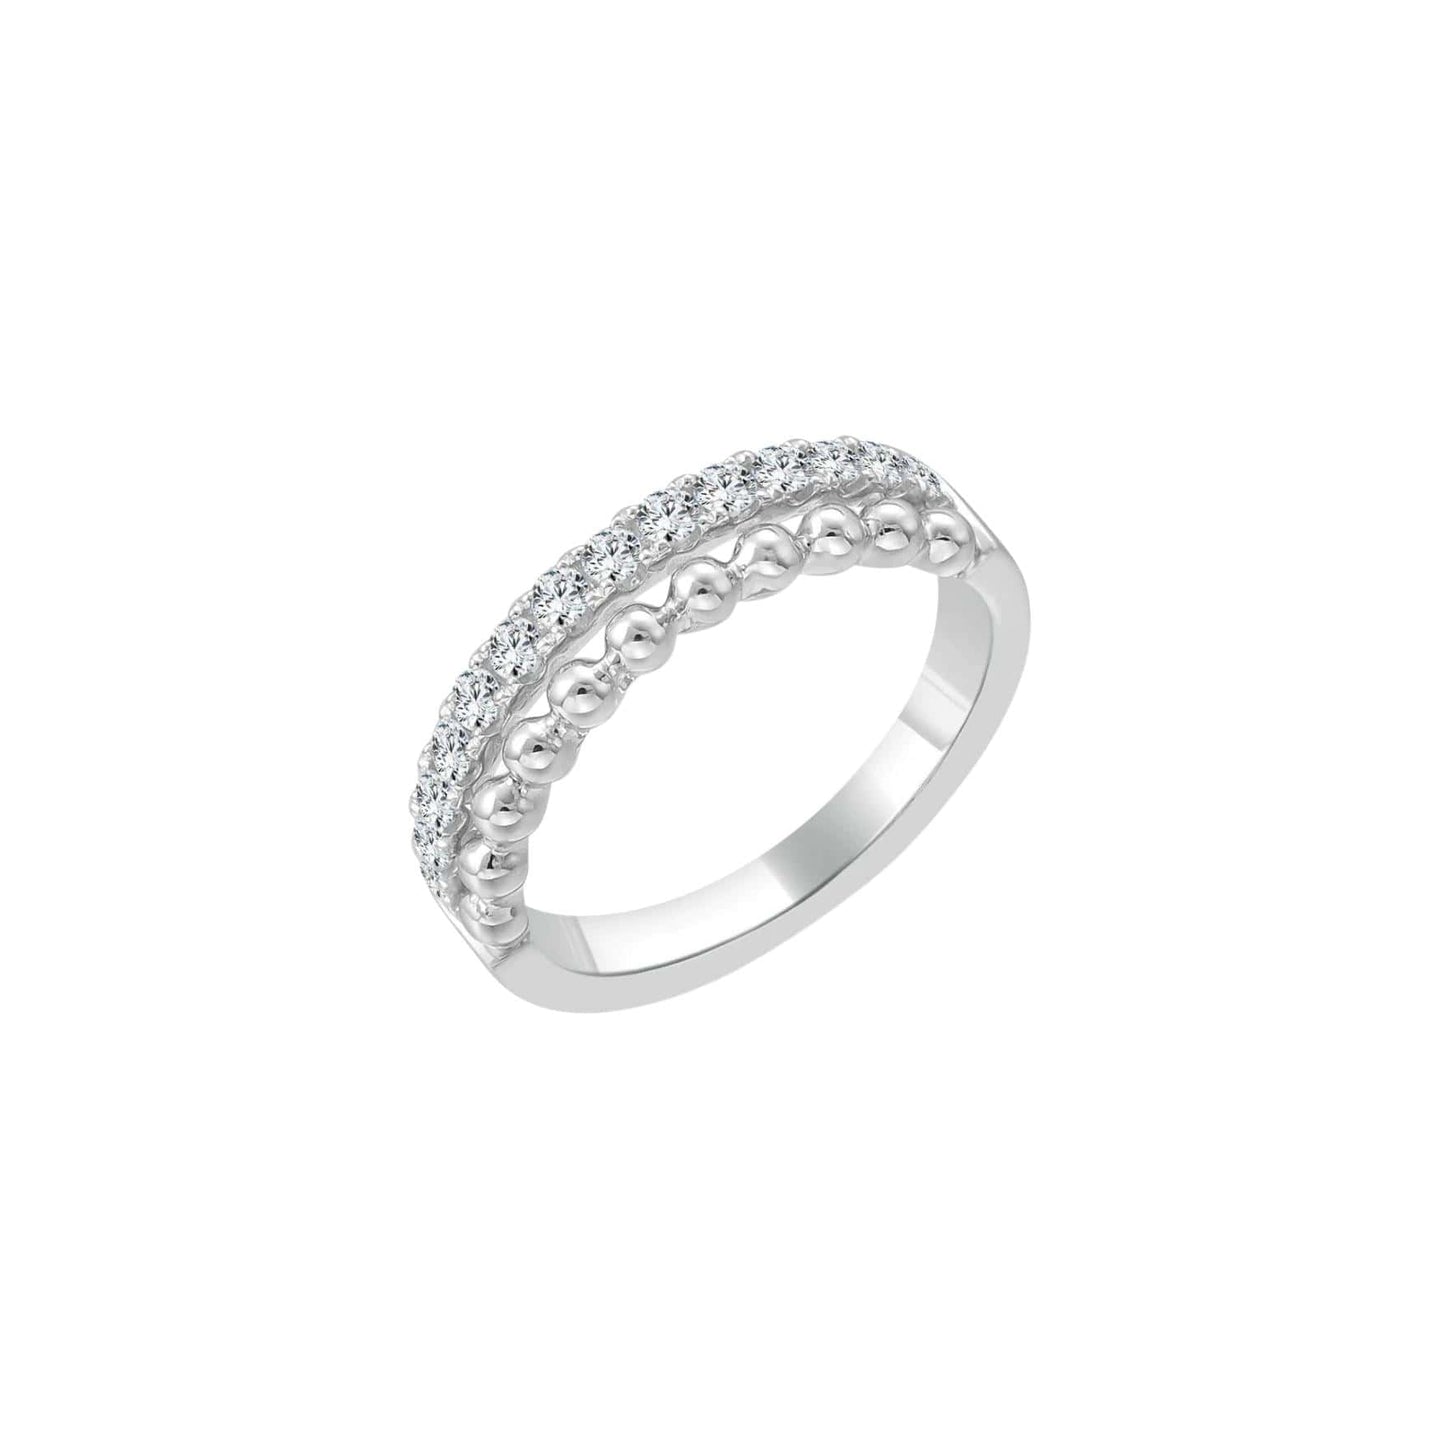 Diamond and Bead Stack Ring